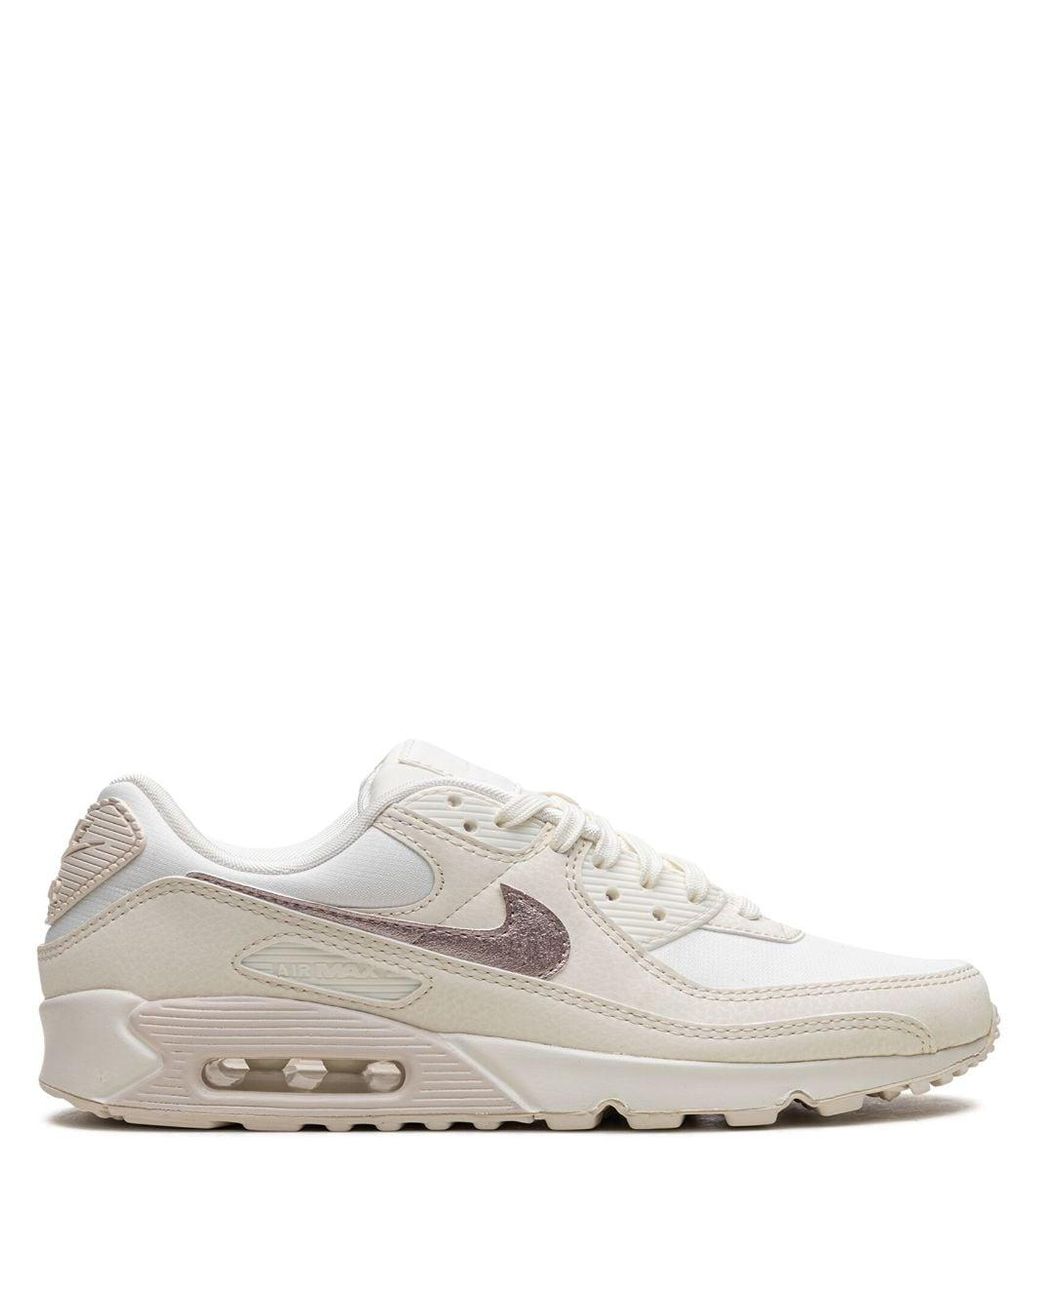 Nike Air Max 90 Sail Rosa Oxford Sneakers in Weiß | Lyst AT